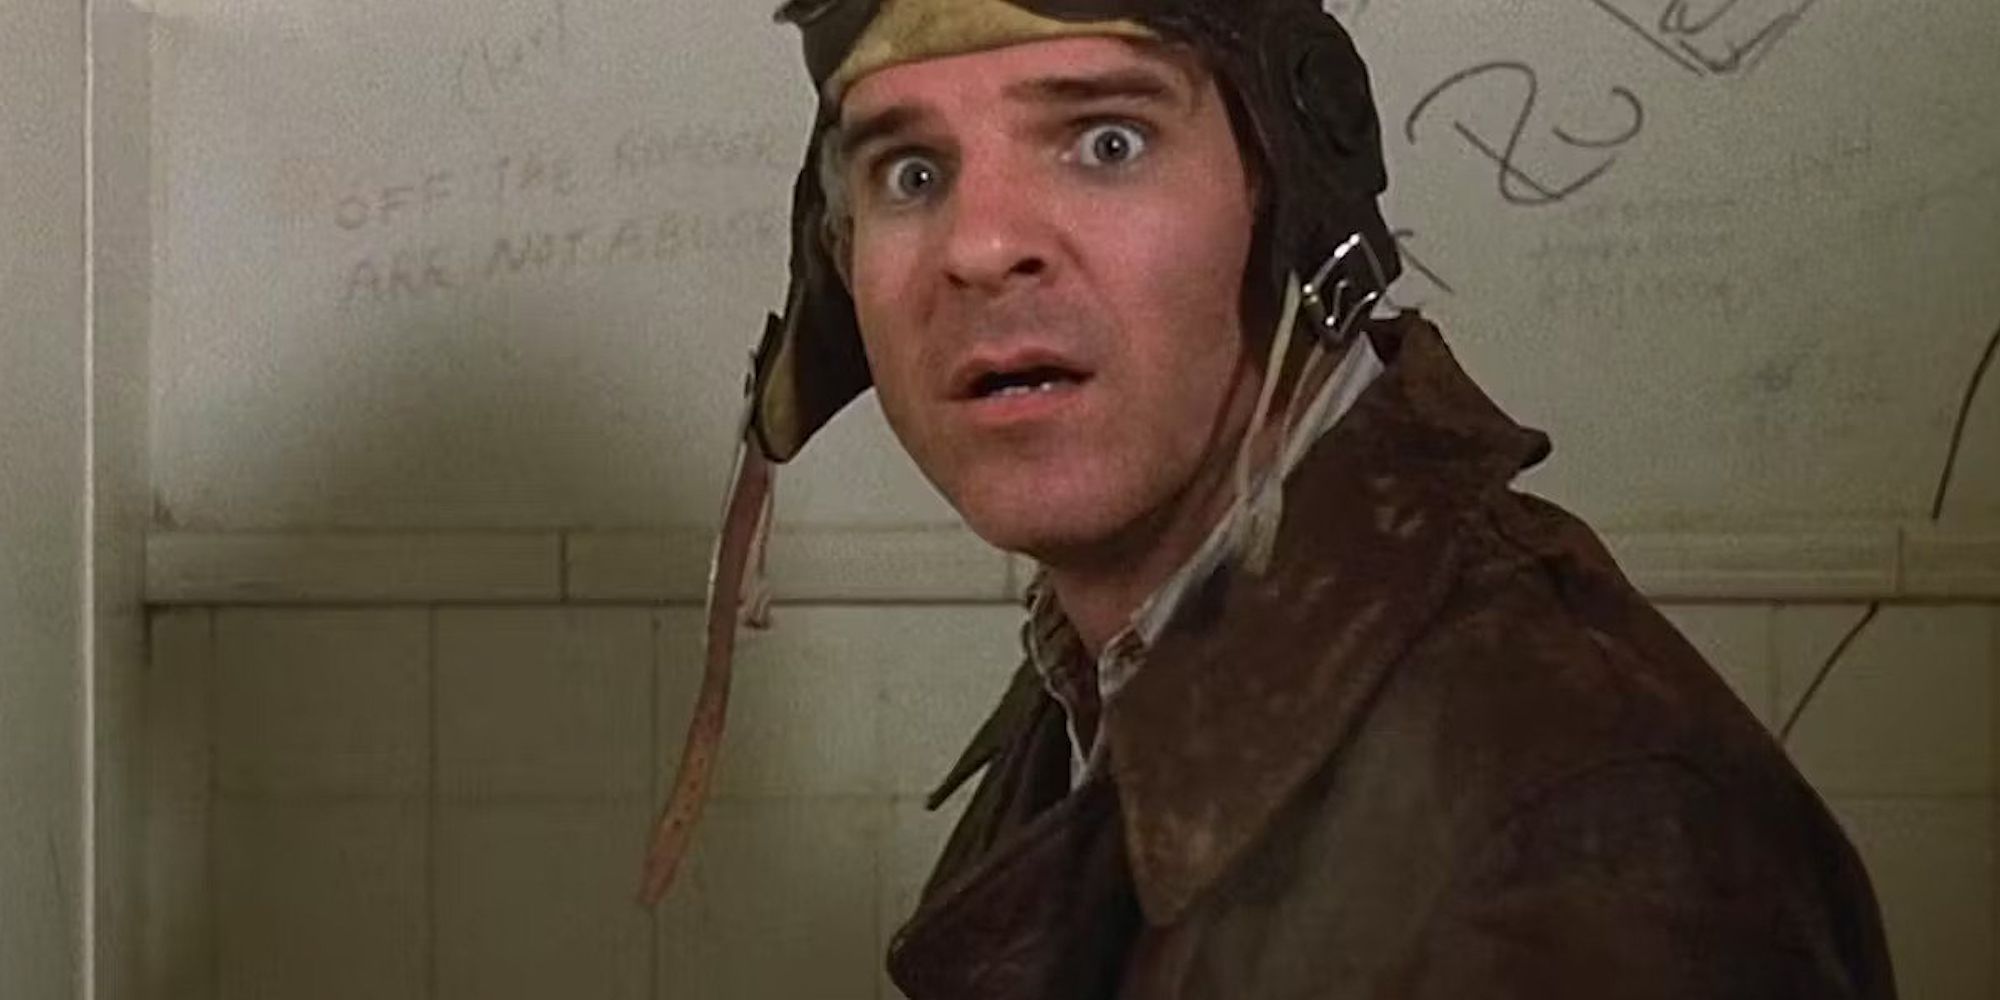 Navin Johnson (Steve Martin) stands in a toilet cubicle with an aviator cap on as he looks to someone shocked.